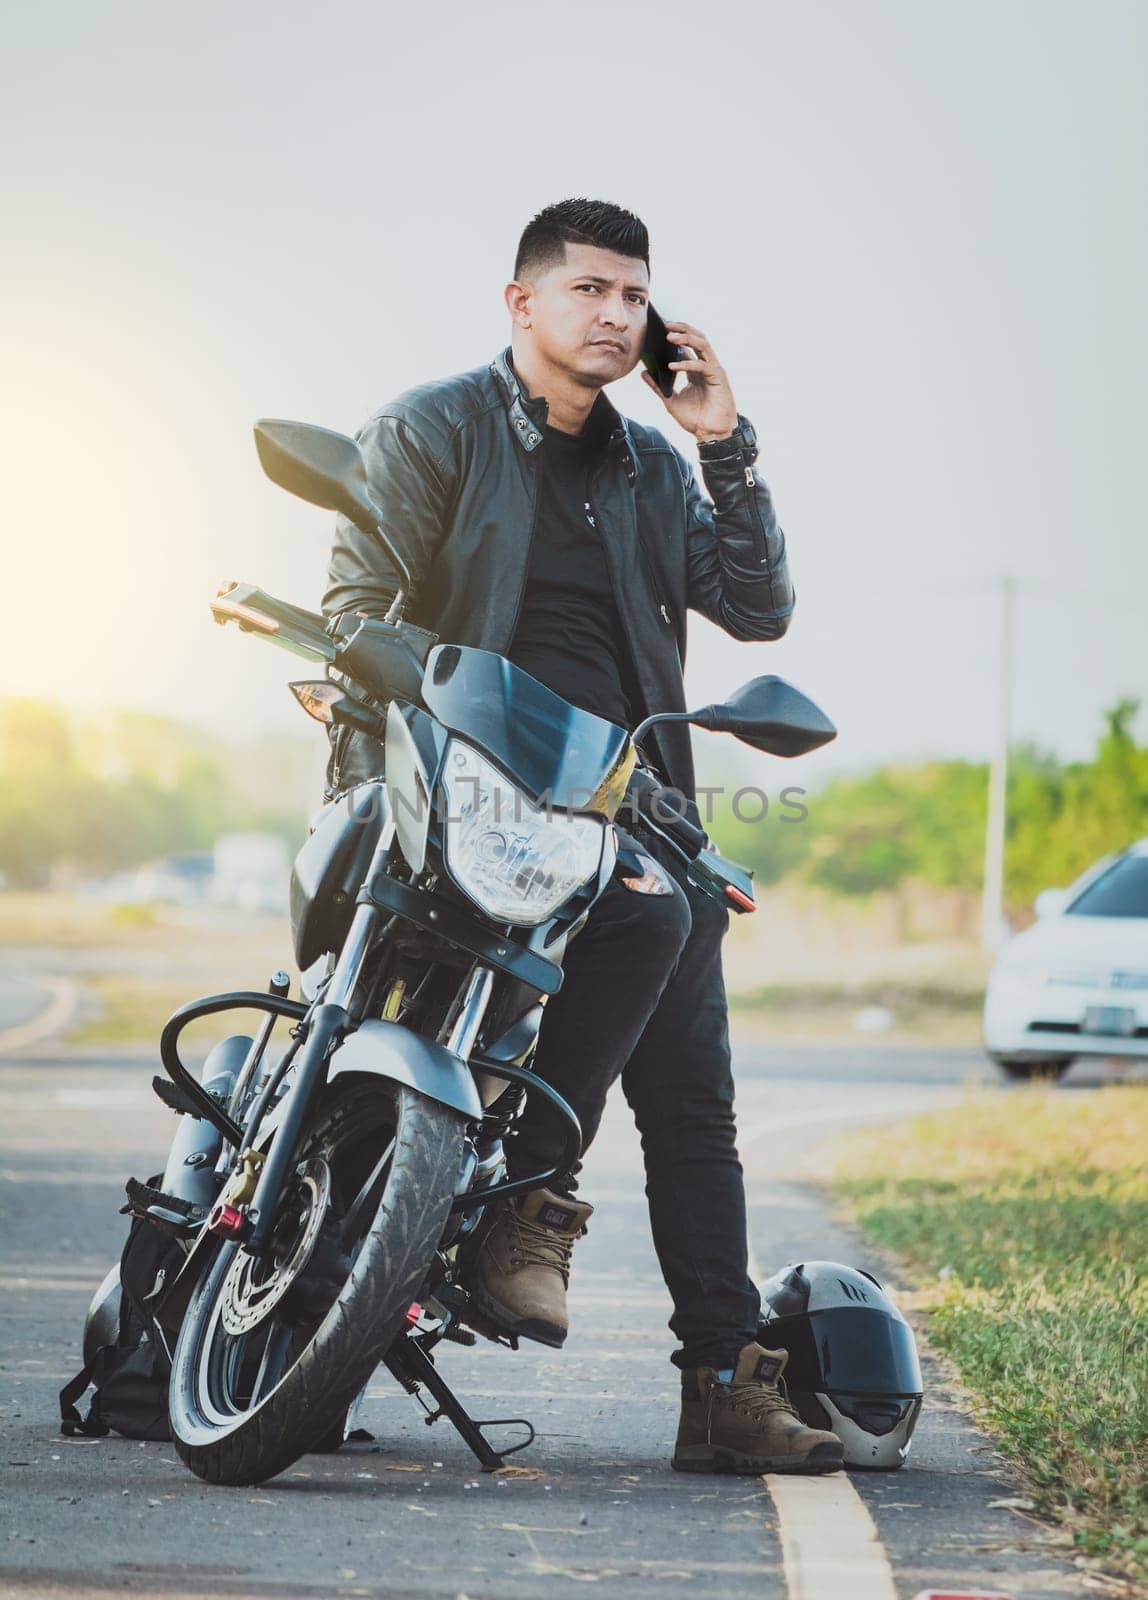 Handsome biker calling on the phone in the street. Biker sitting on motorcycle calling on the phone on the roadside. Concept of motorcyclist using the phone